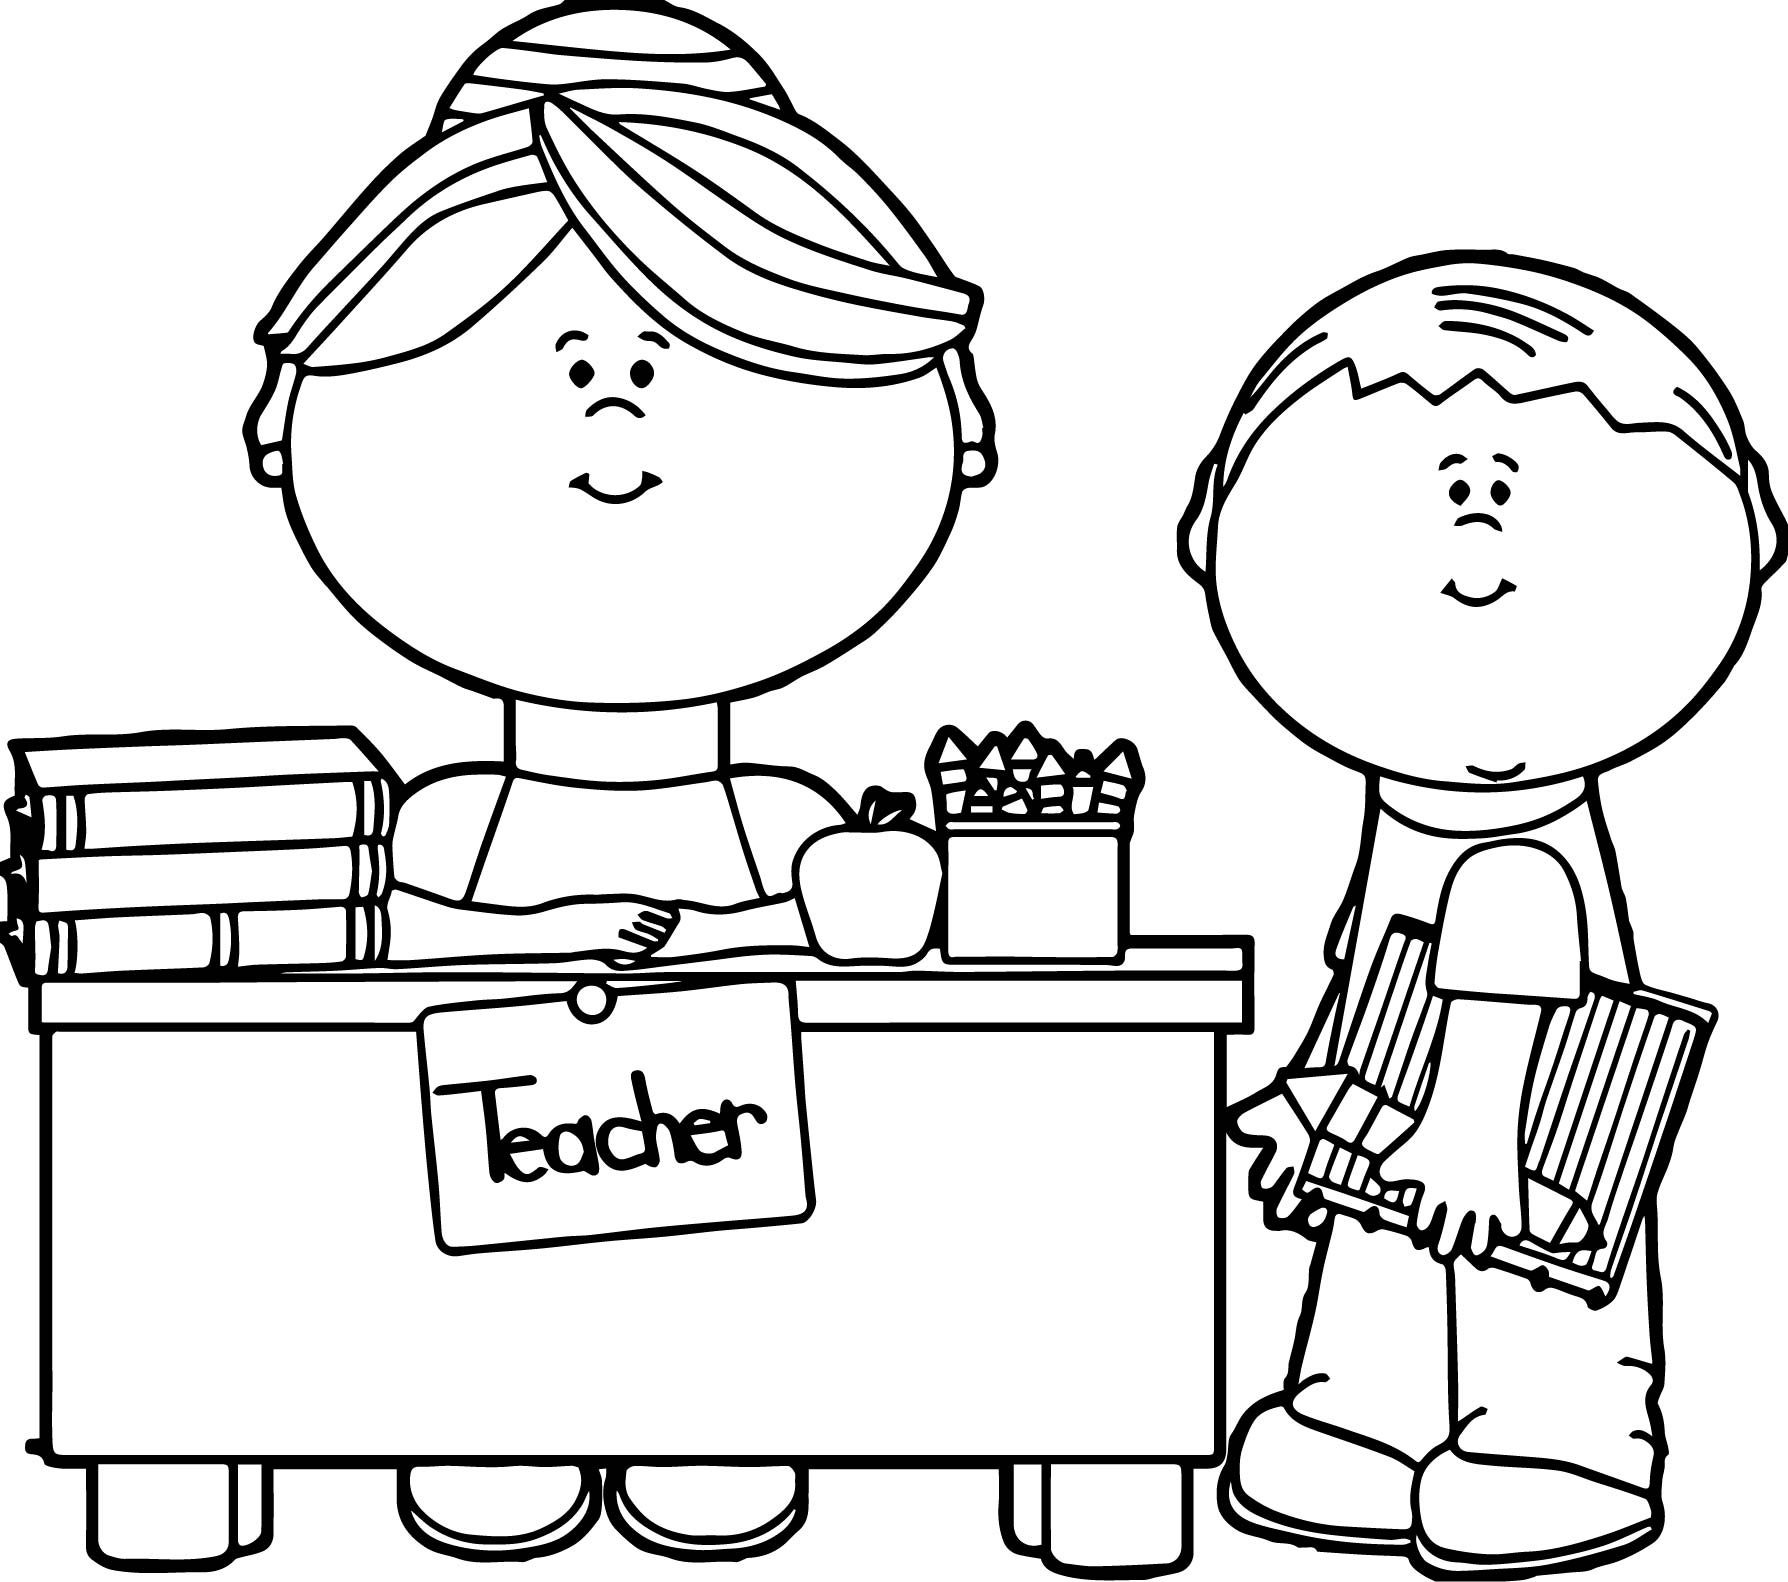 Coloring Pages Teacher Teacher Coloring Pages Best Coloring Pages For Kids